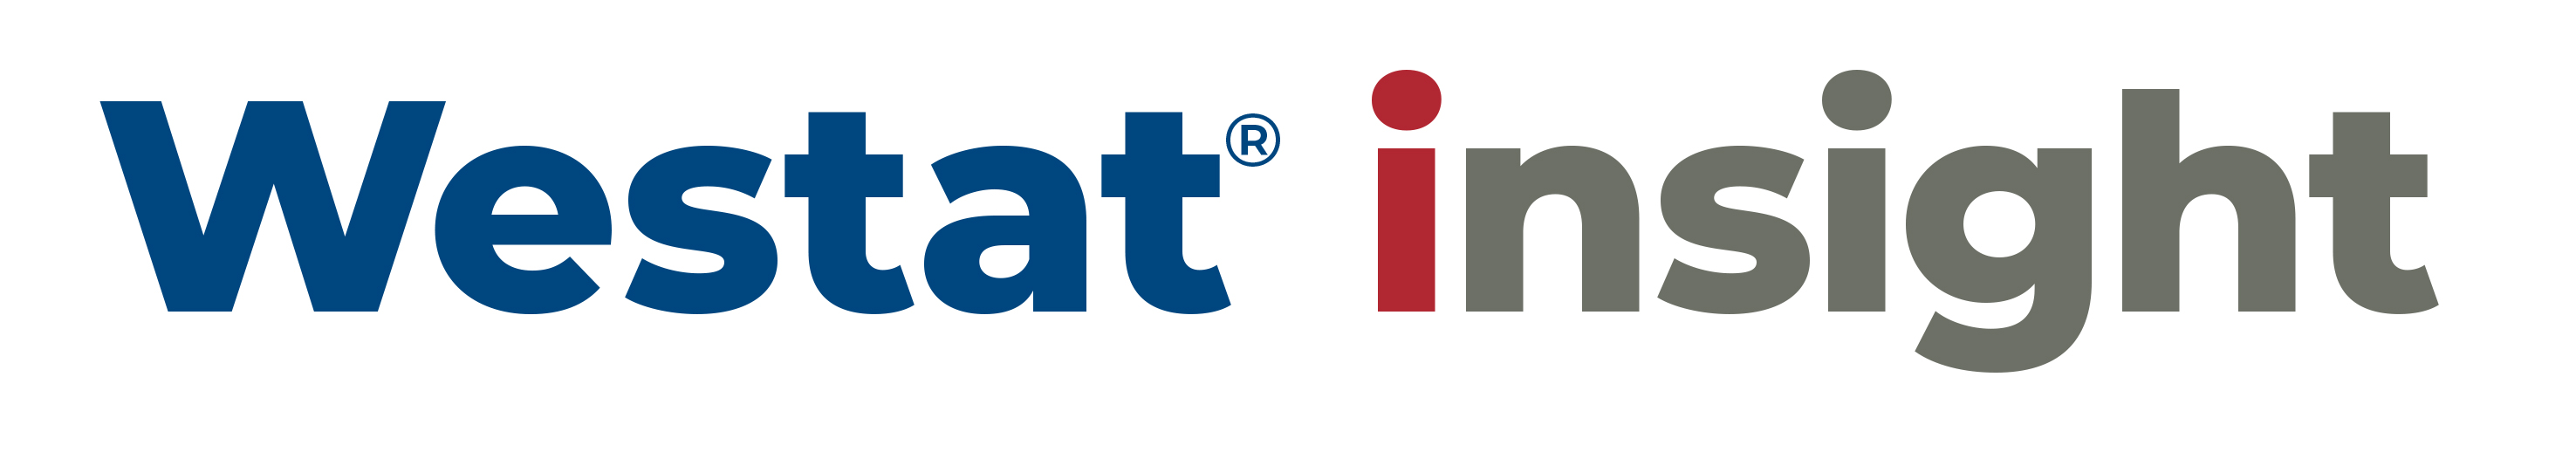 Westat & Insight Policy Research logos